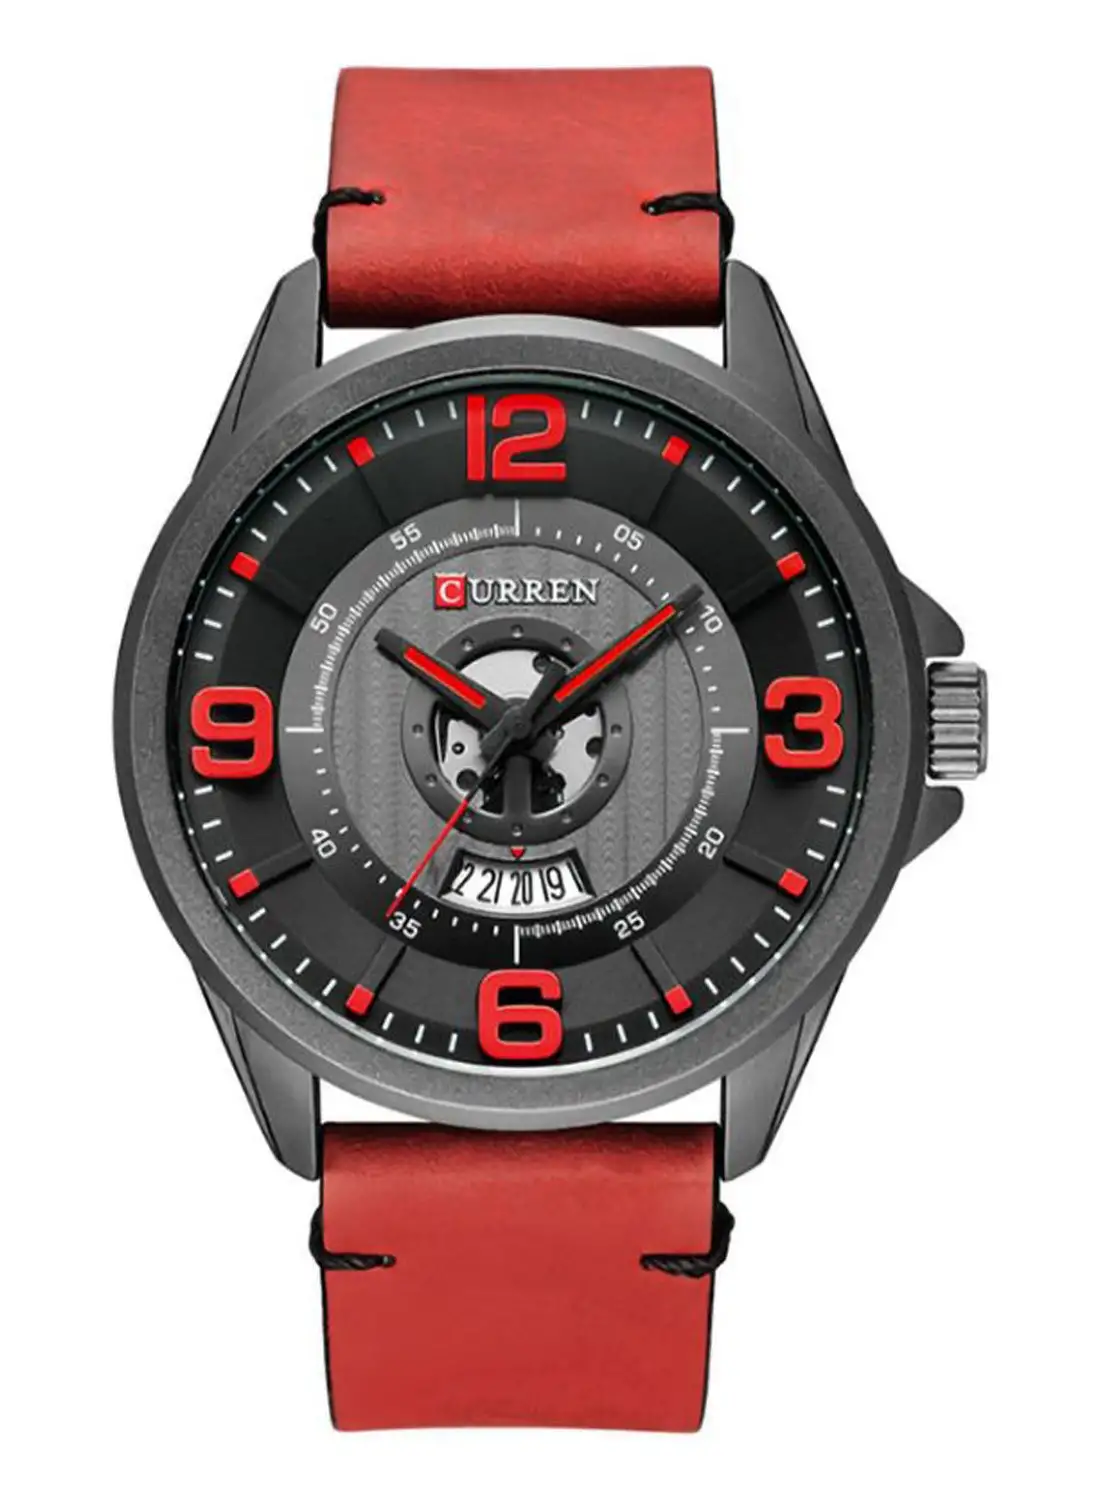 CURREN Men's Leather Analog Watch 8305 - 45 mm - Red